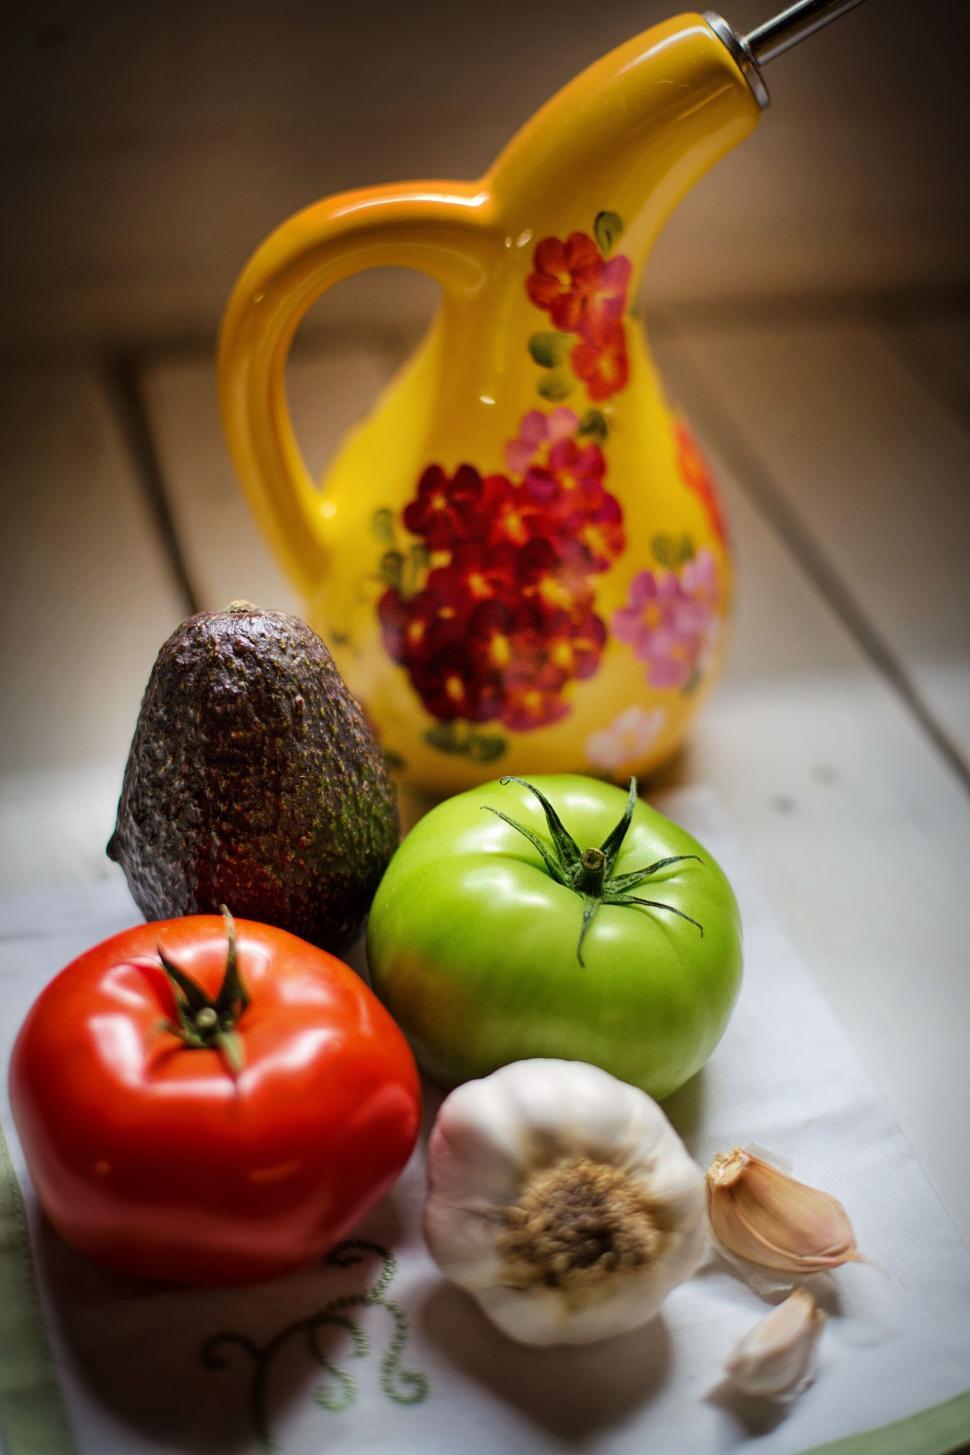 Free Image of Assorted Vegetables  